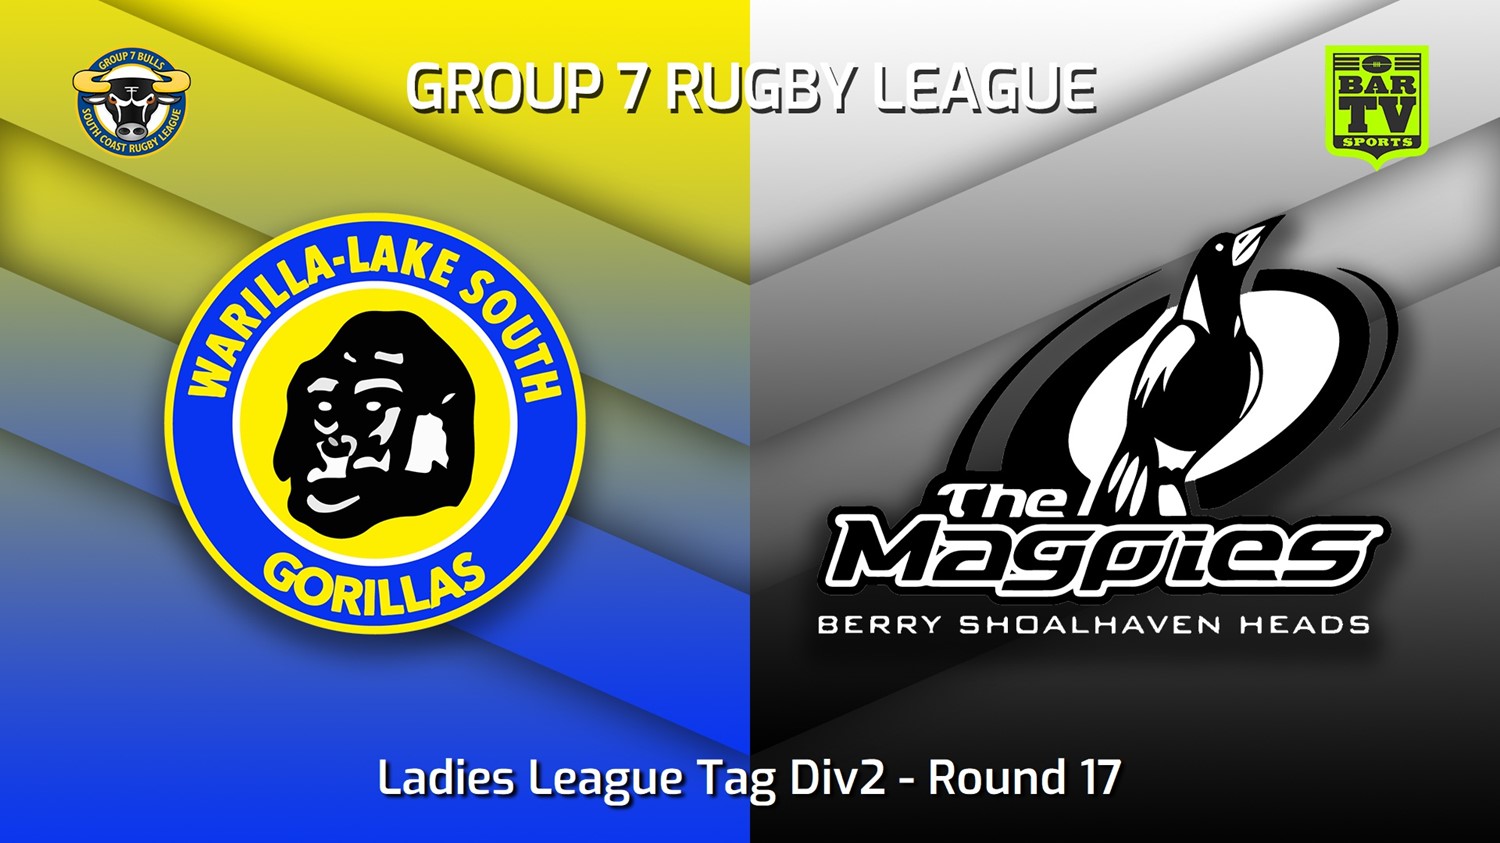 230813-South Coast Round 17 - Ladies League Tag Div2 - Warilla-Lake South Gorillas v Berry-Shoalhaven Heads Magpies Slate Image